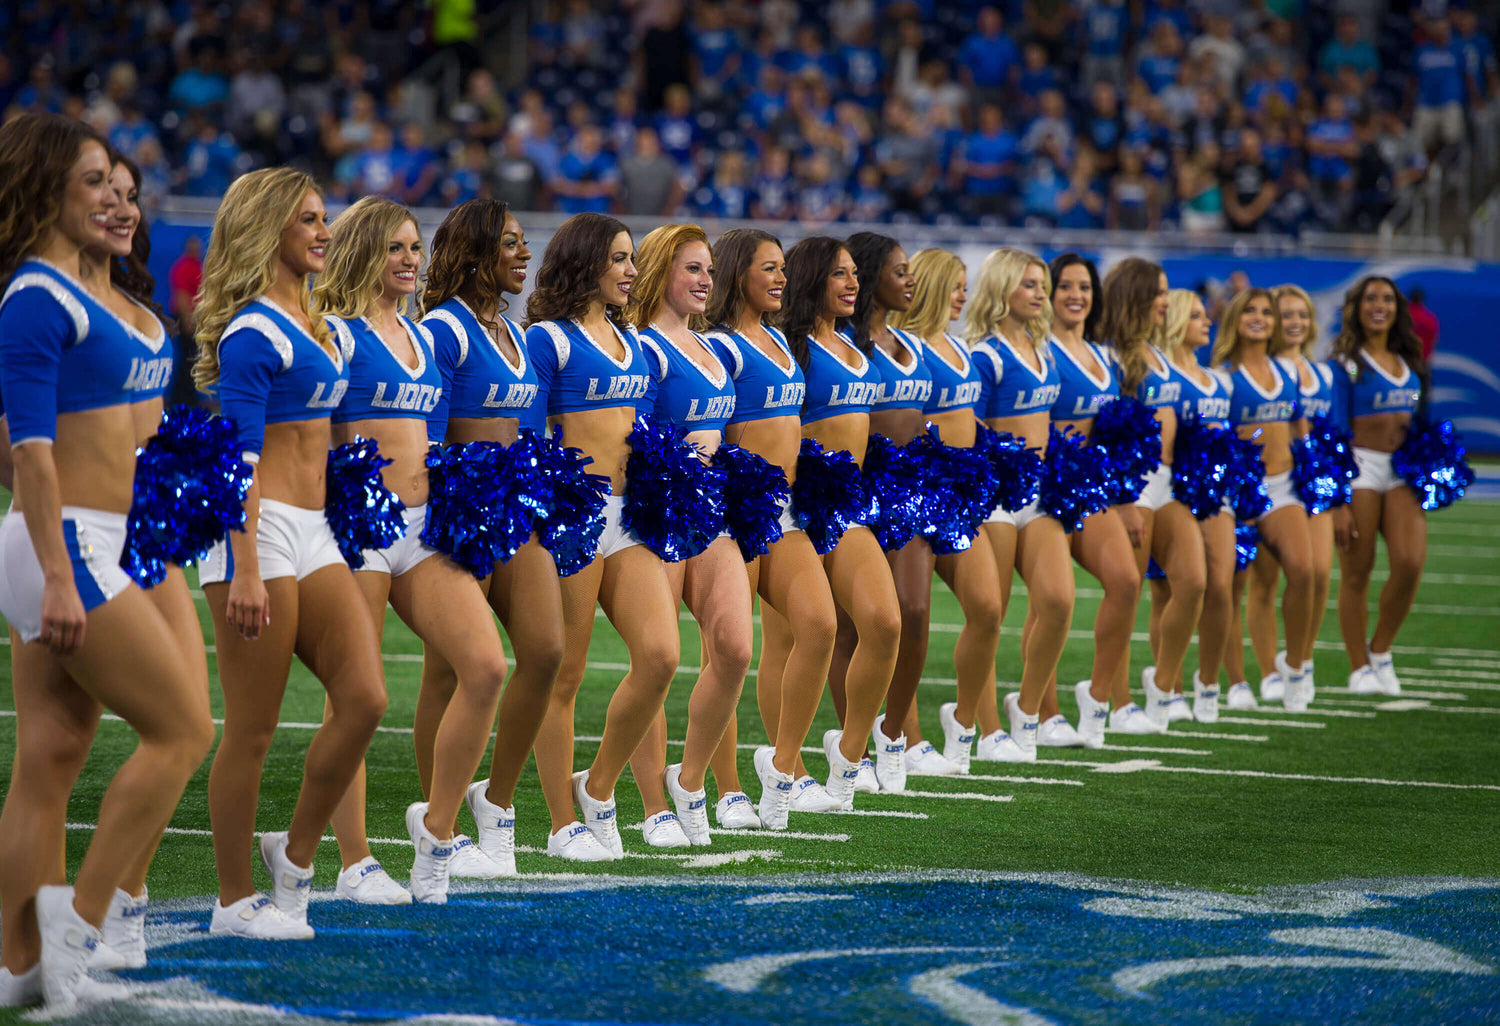 Detroit Lions Cheer Leaders wearing Pastry Shoes